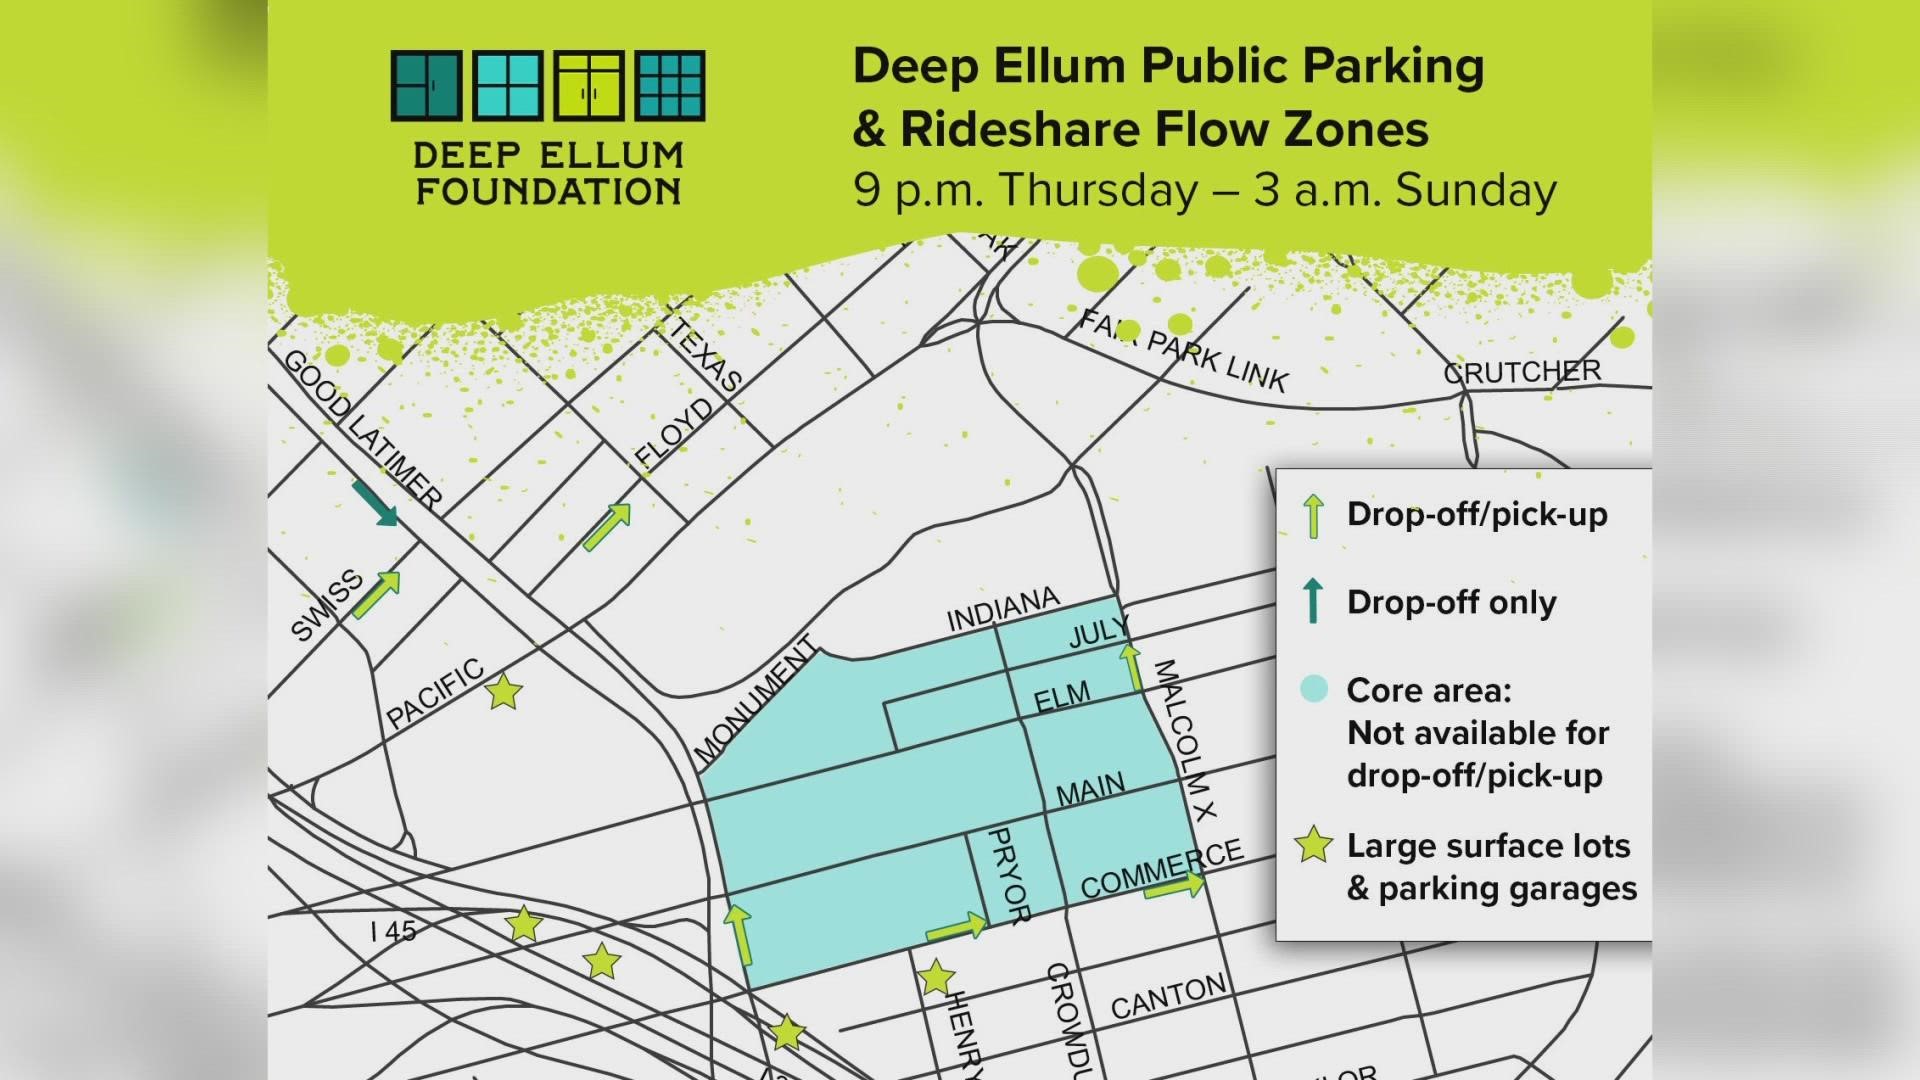 Deep Ellum announced that its rideshare flow zones are returning this weekend and in place on Thursday through Saturday nights.